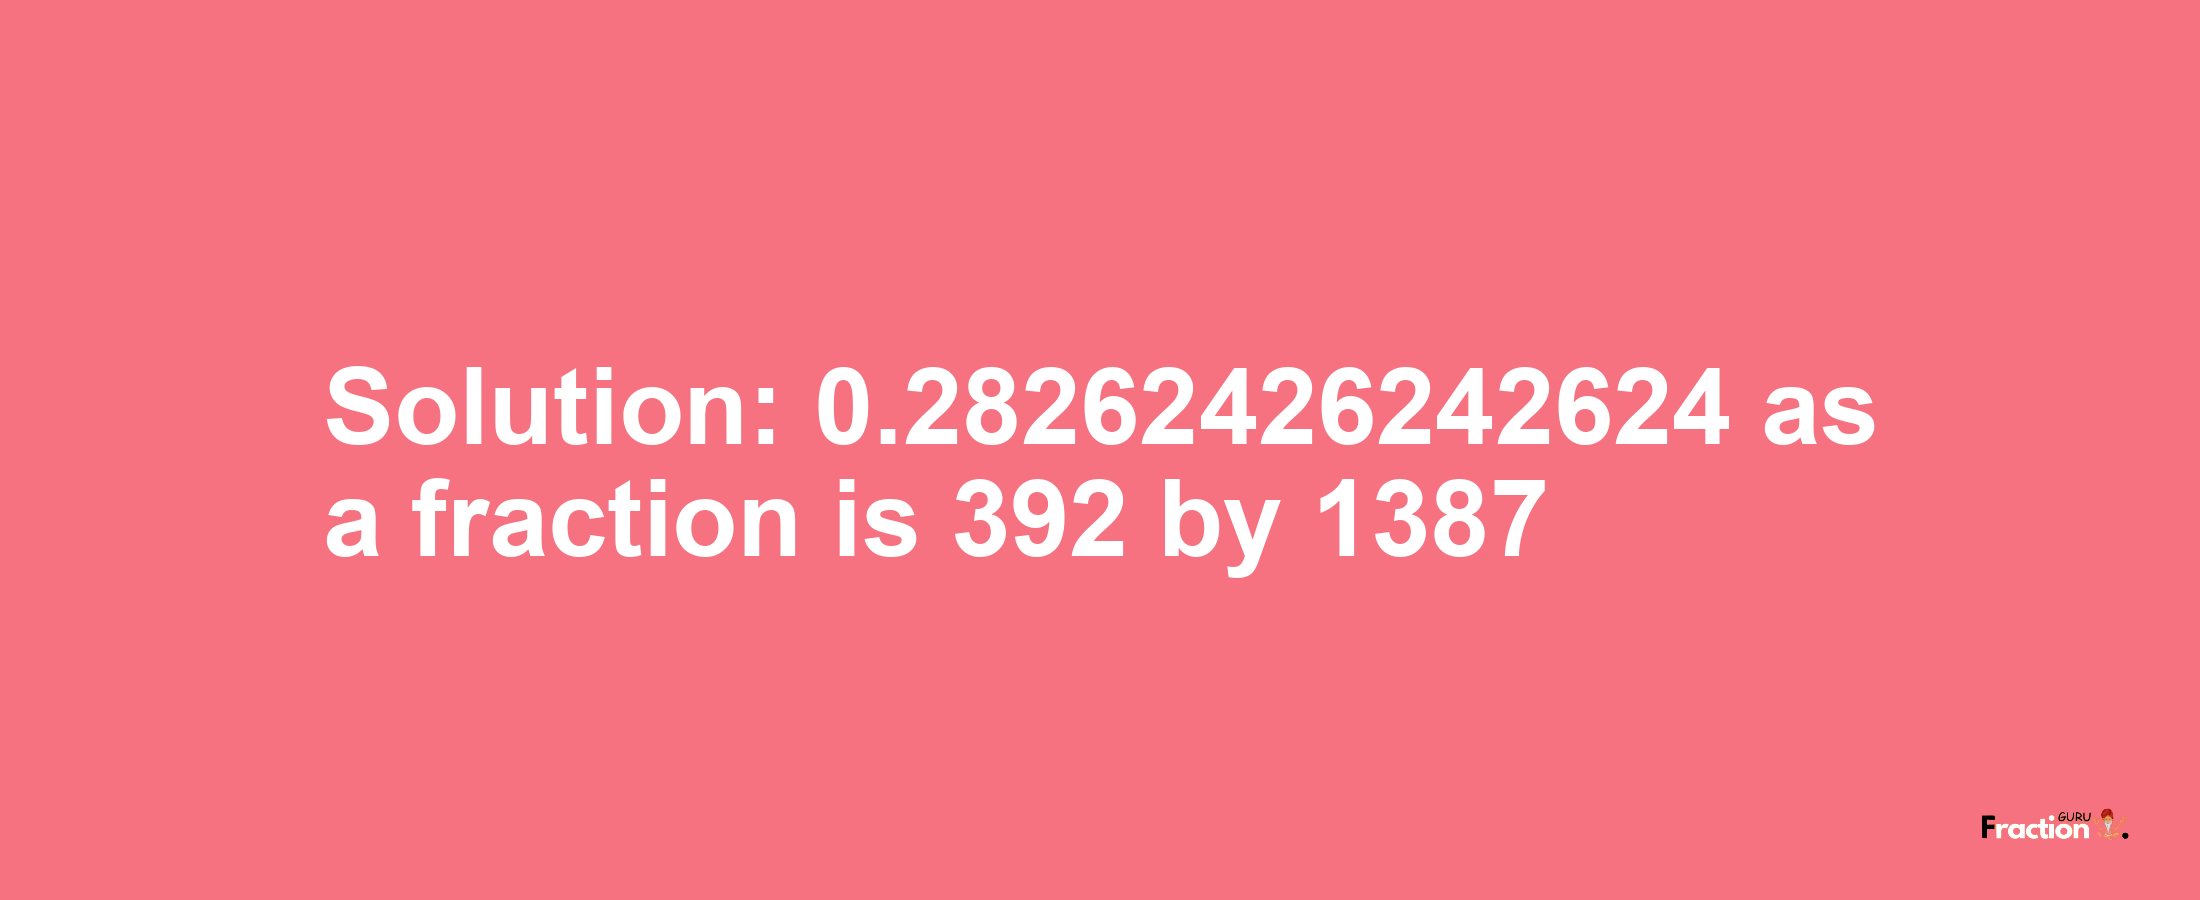 Solution:0.28262426242624 as a fraction is 392/1387